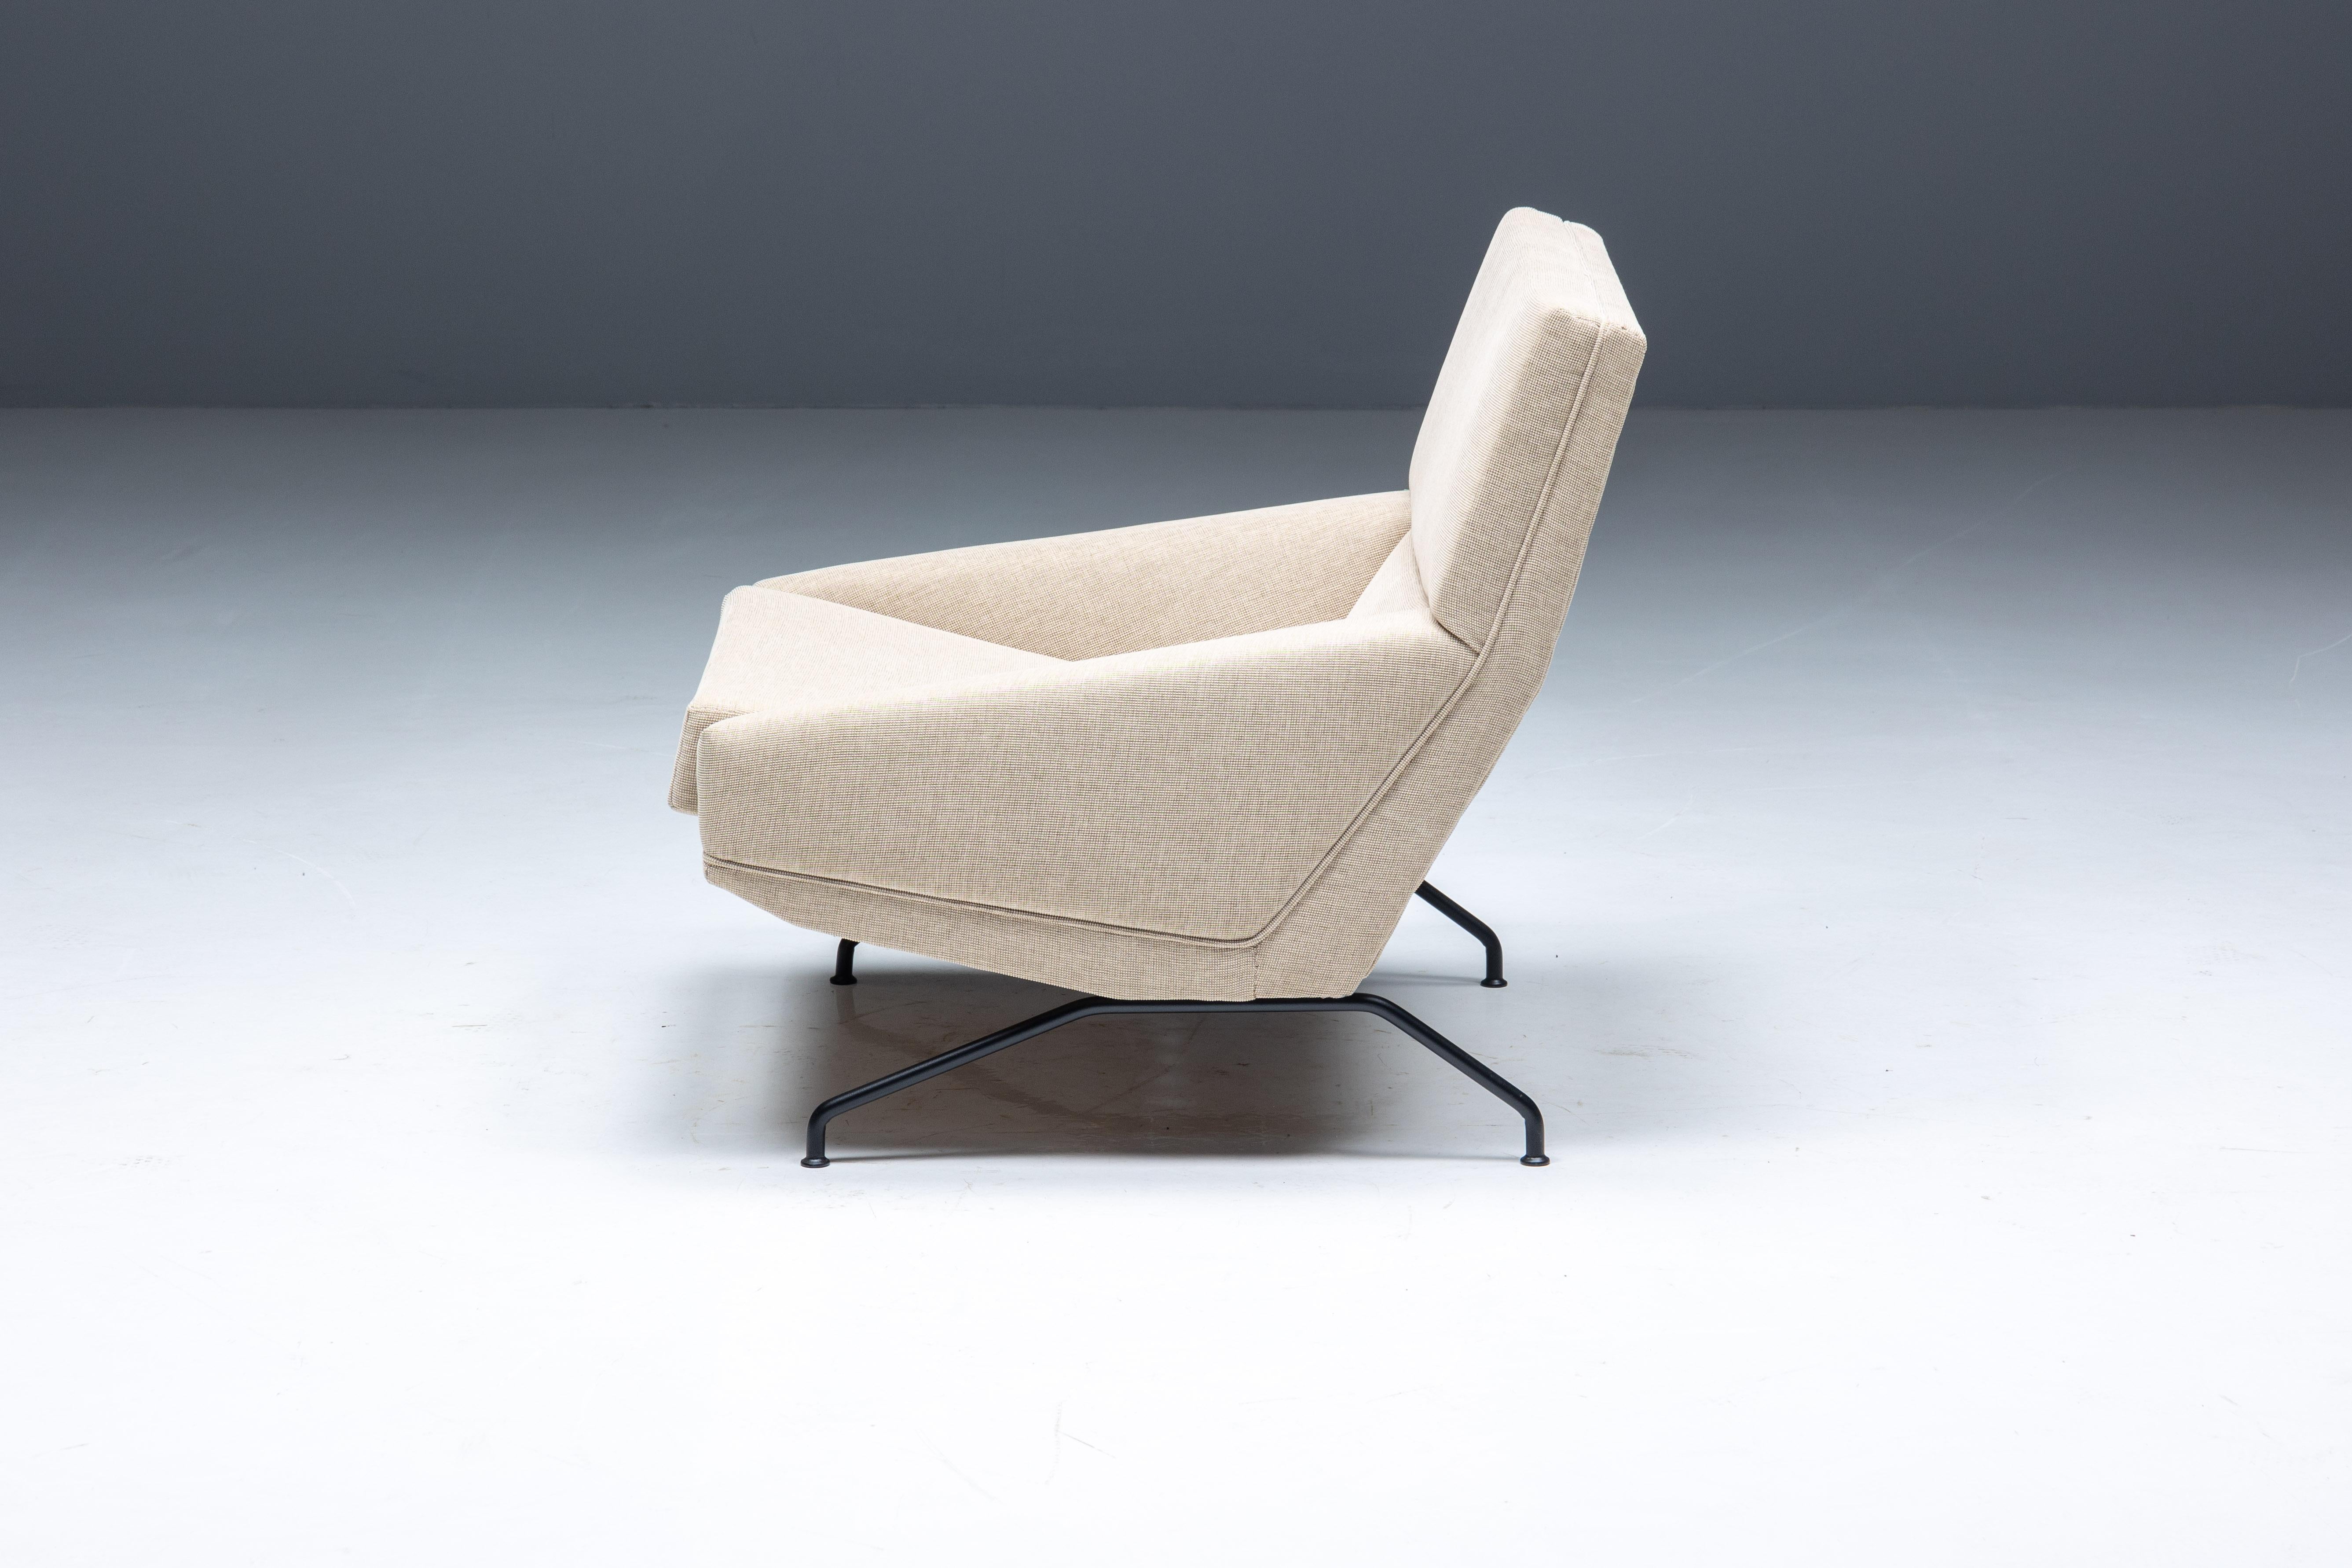 Lounge Chairs by Georges van Rijck for Beaufort, Belgium, 1960s For Sale 2